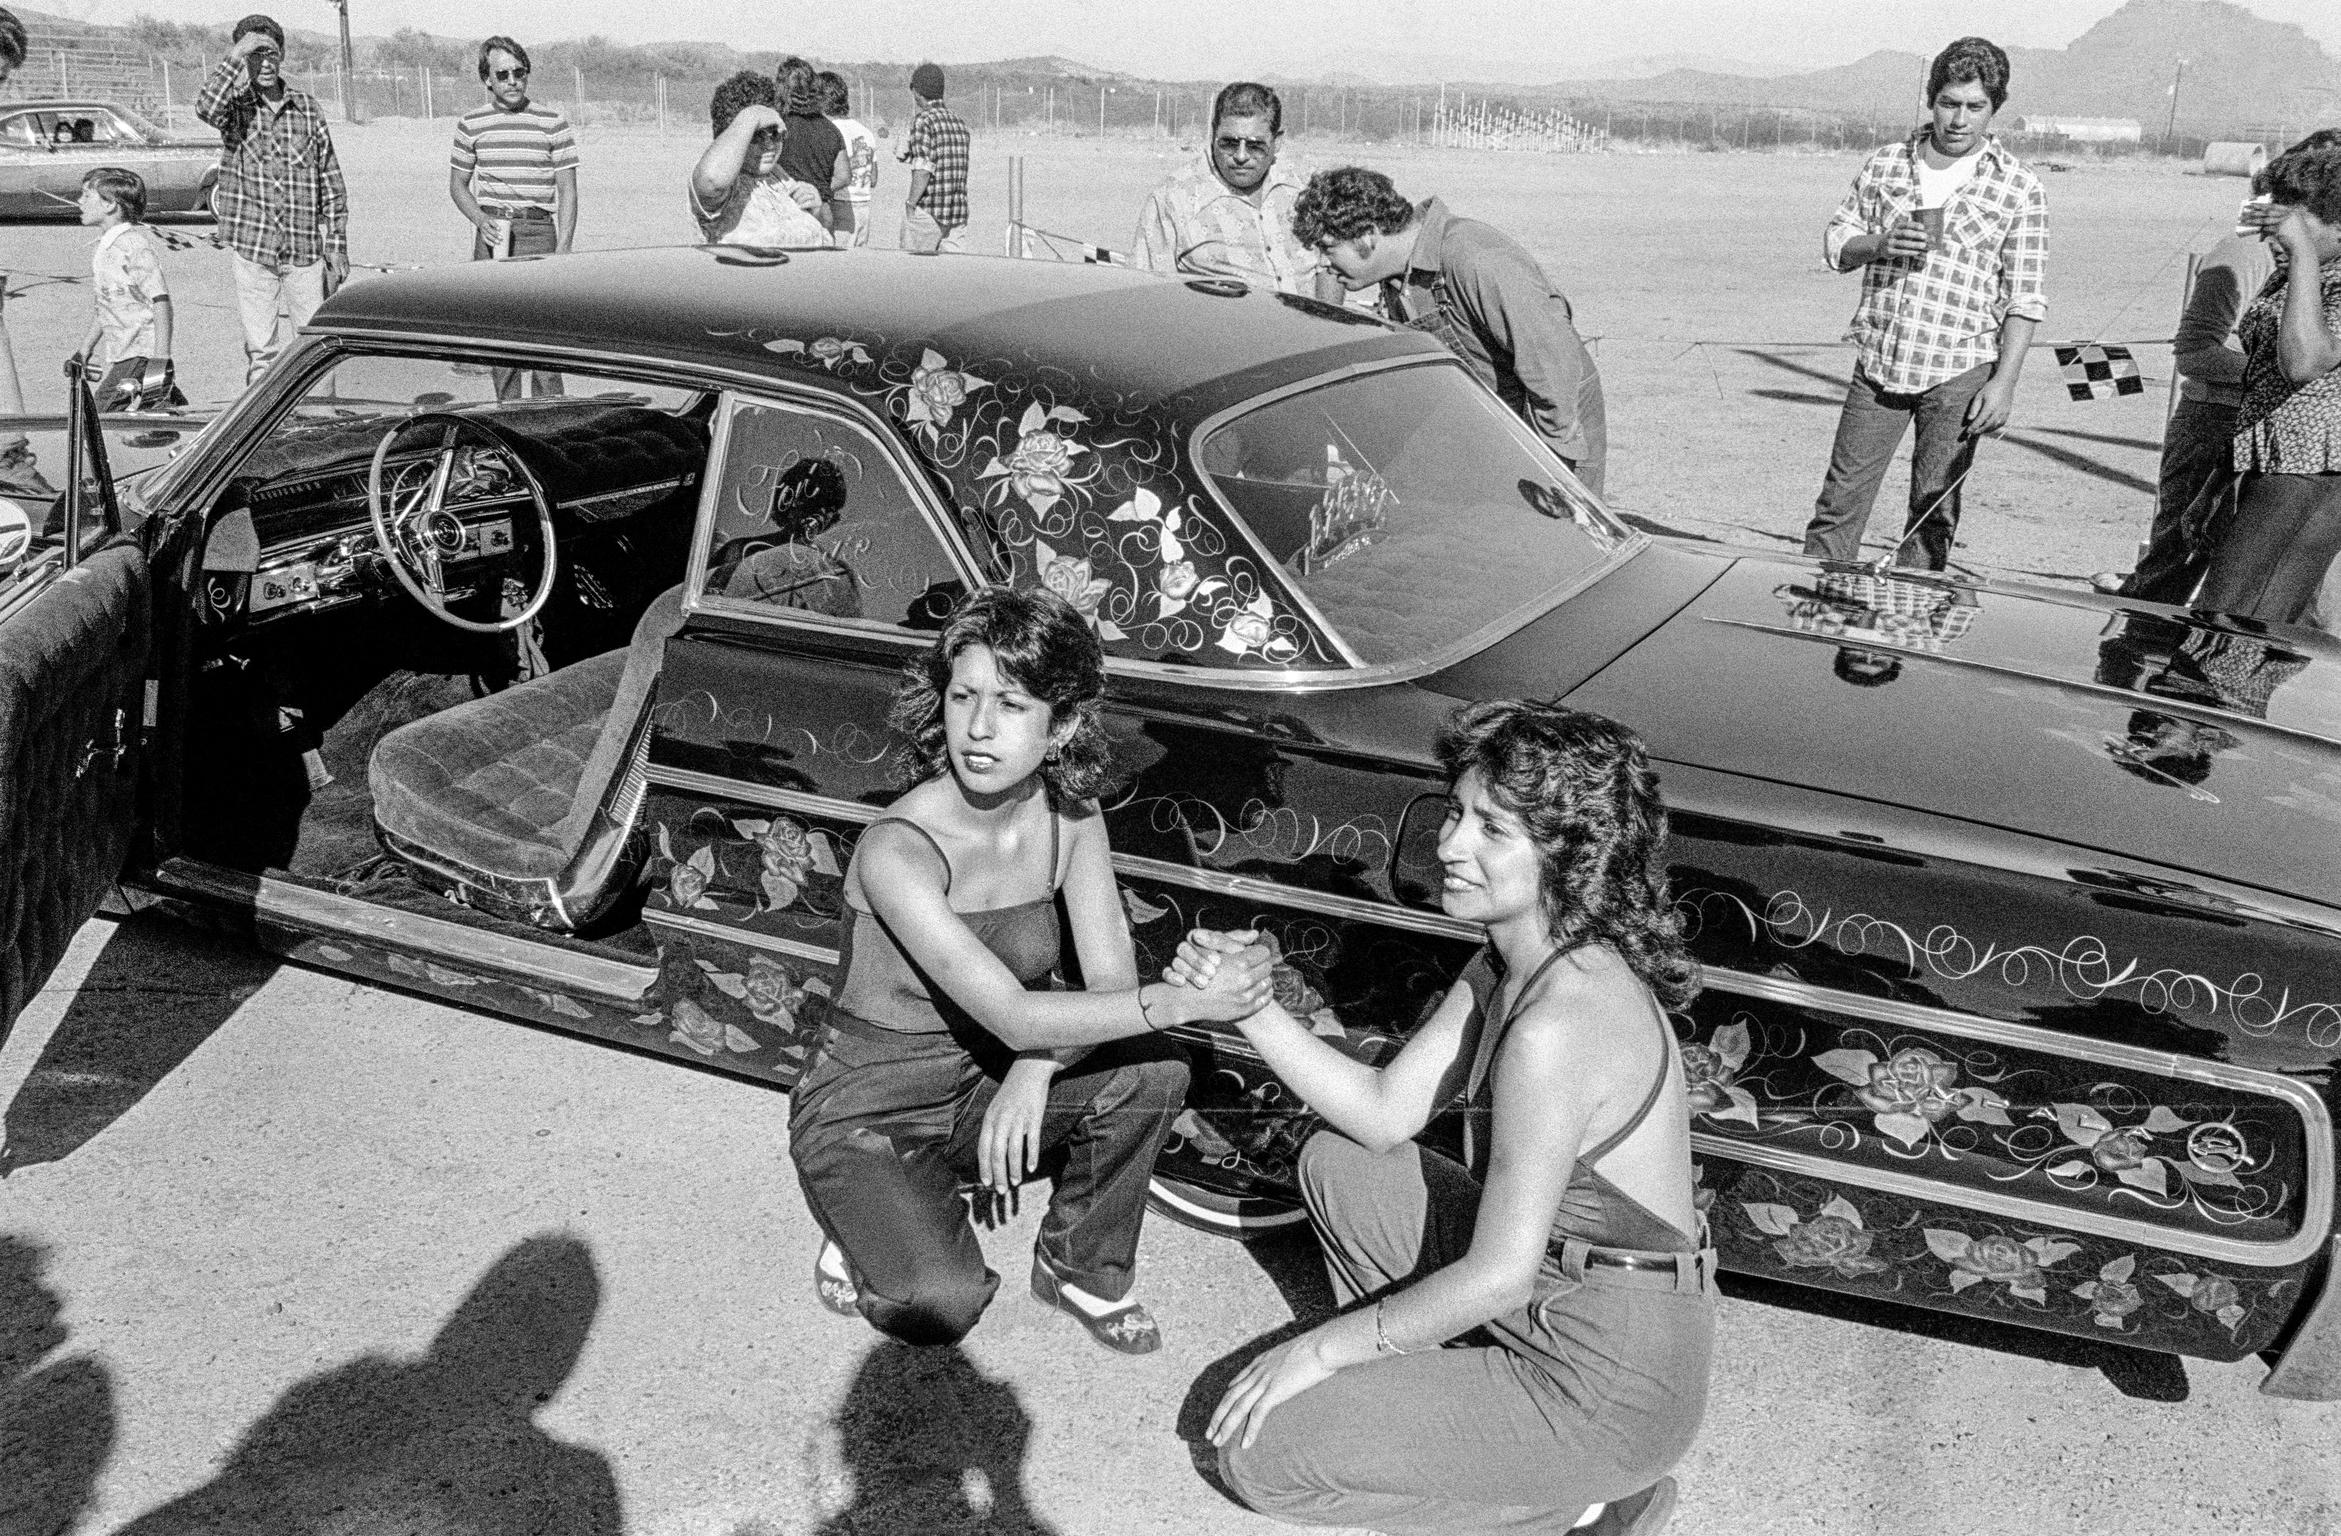 Two girl friends pose for their photograph, in front of a prize winning car, at a Low Riders meeting on the outskirts of Phoenix. Arizona USA